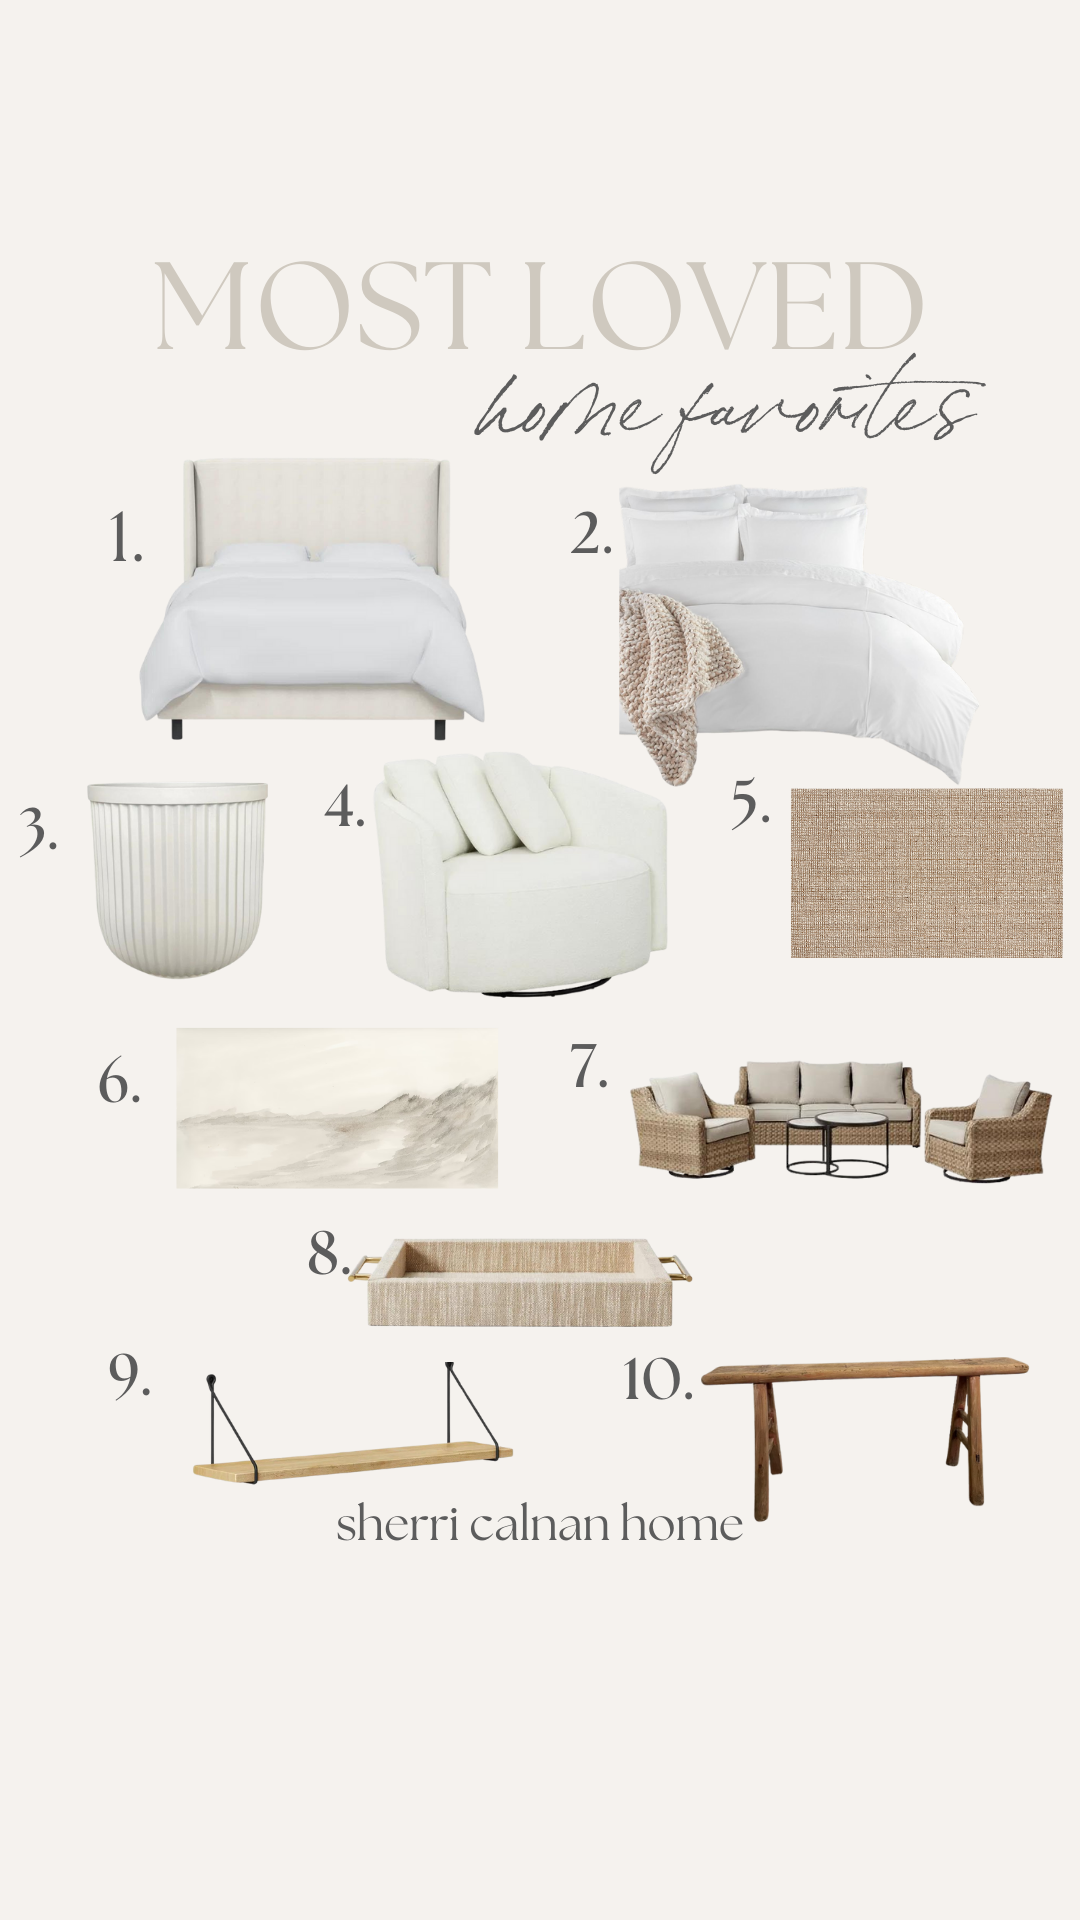 March Most Loved Home Items, Home Favorites, Home Finds, March favorites, March finds, My favorite finds, Home decor, Home inspo, Coastal Home, March Most Loved, March home items, Favorite home finds, most loved home favorites, most loved, home items, home decor, interior design, march home finds, march home favorites 